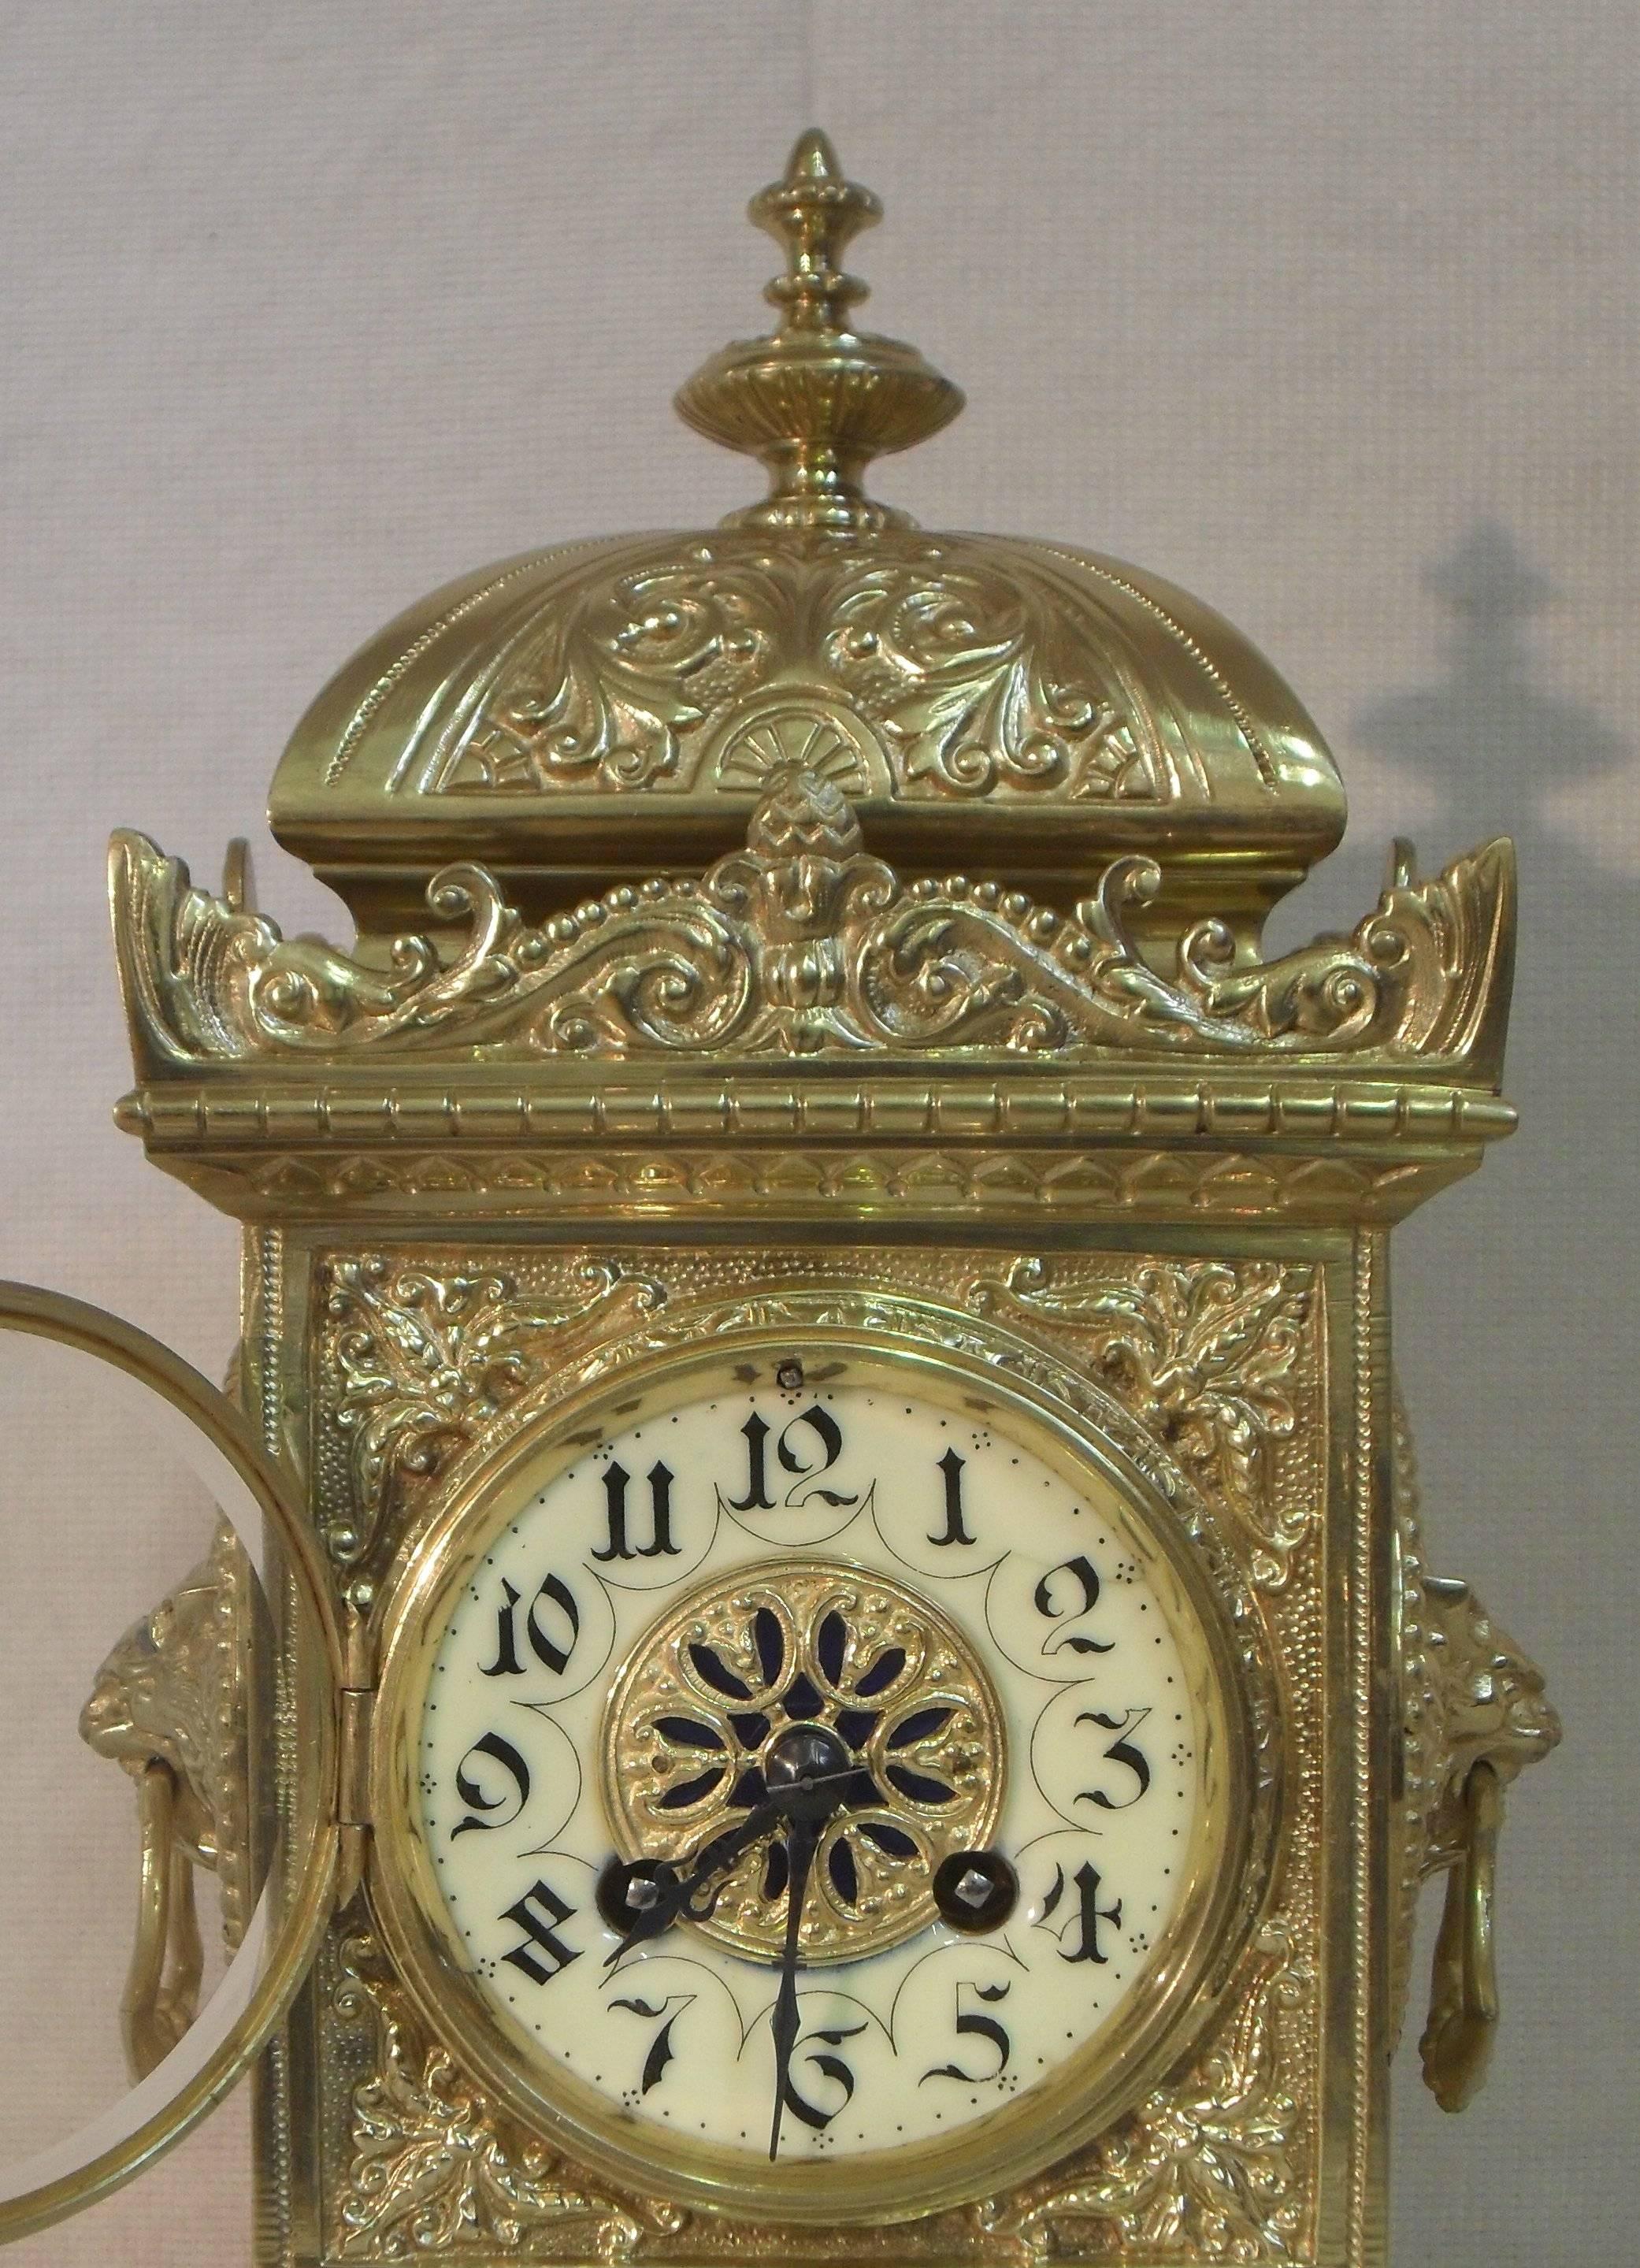 A very decorative French brass gilt mantel clock with side carrying handles The clock has a porcelain chapter ring with a pierced gilt centre and an eight day French movement which strikes the hours and half hours on a gong.
 
The clock is stamped